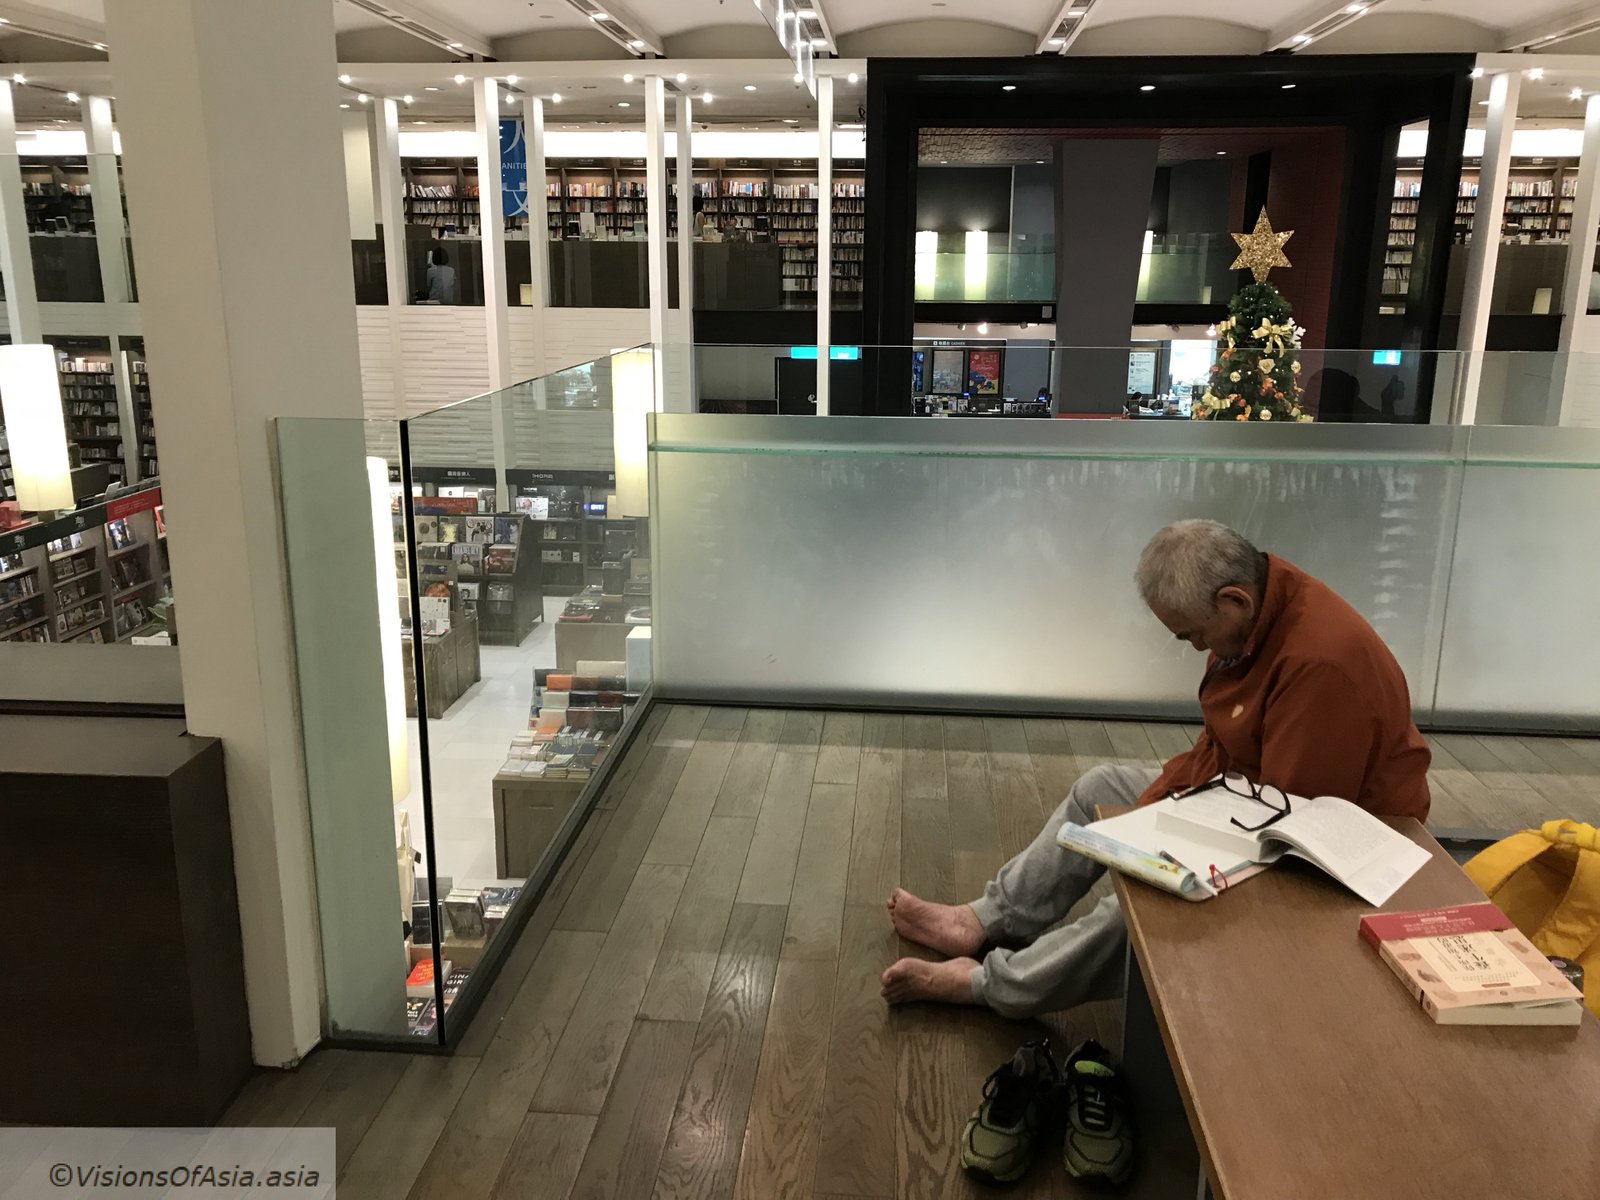 Man dozing at Eslite: a bookstore as a place to live